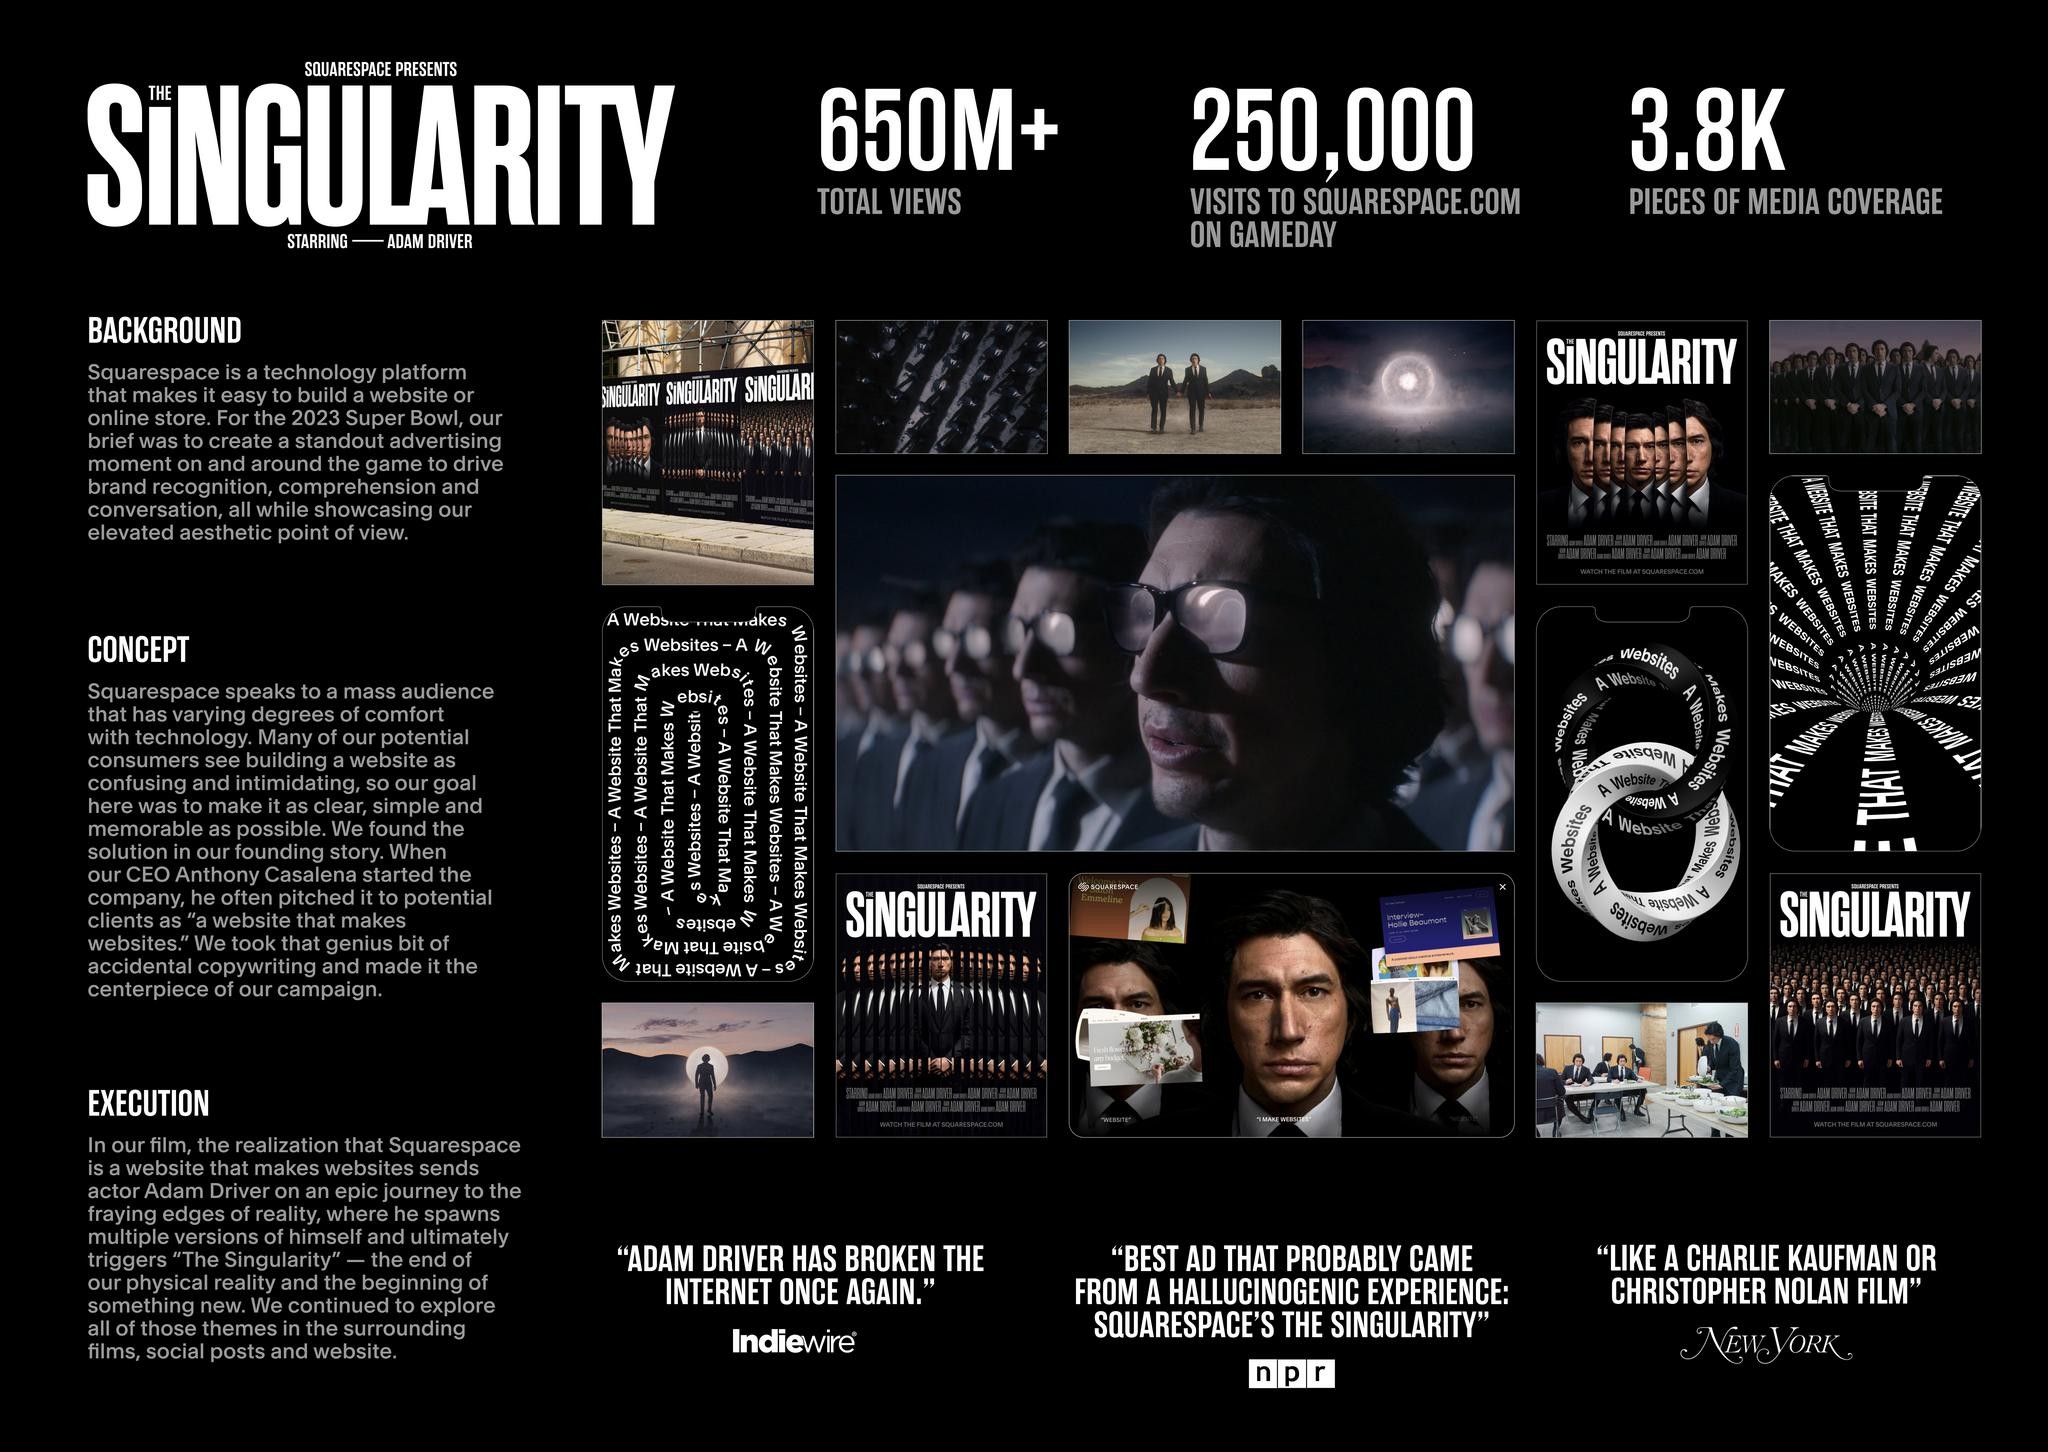 THE SINGULARITY: INTEGRATED CAMPAIGN